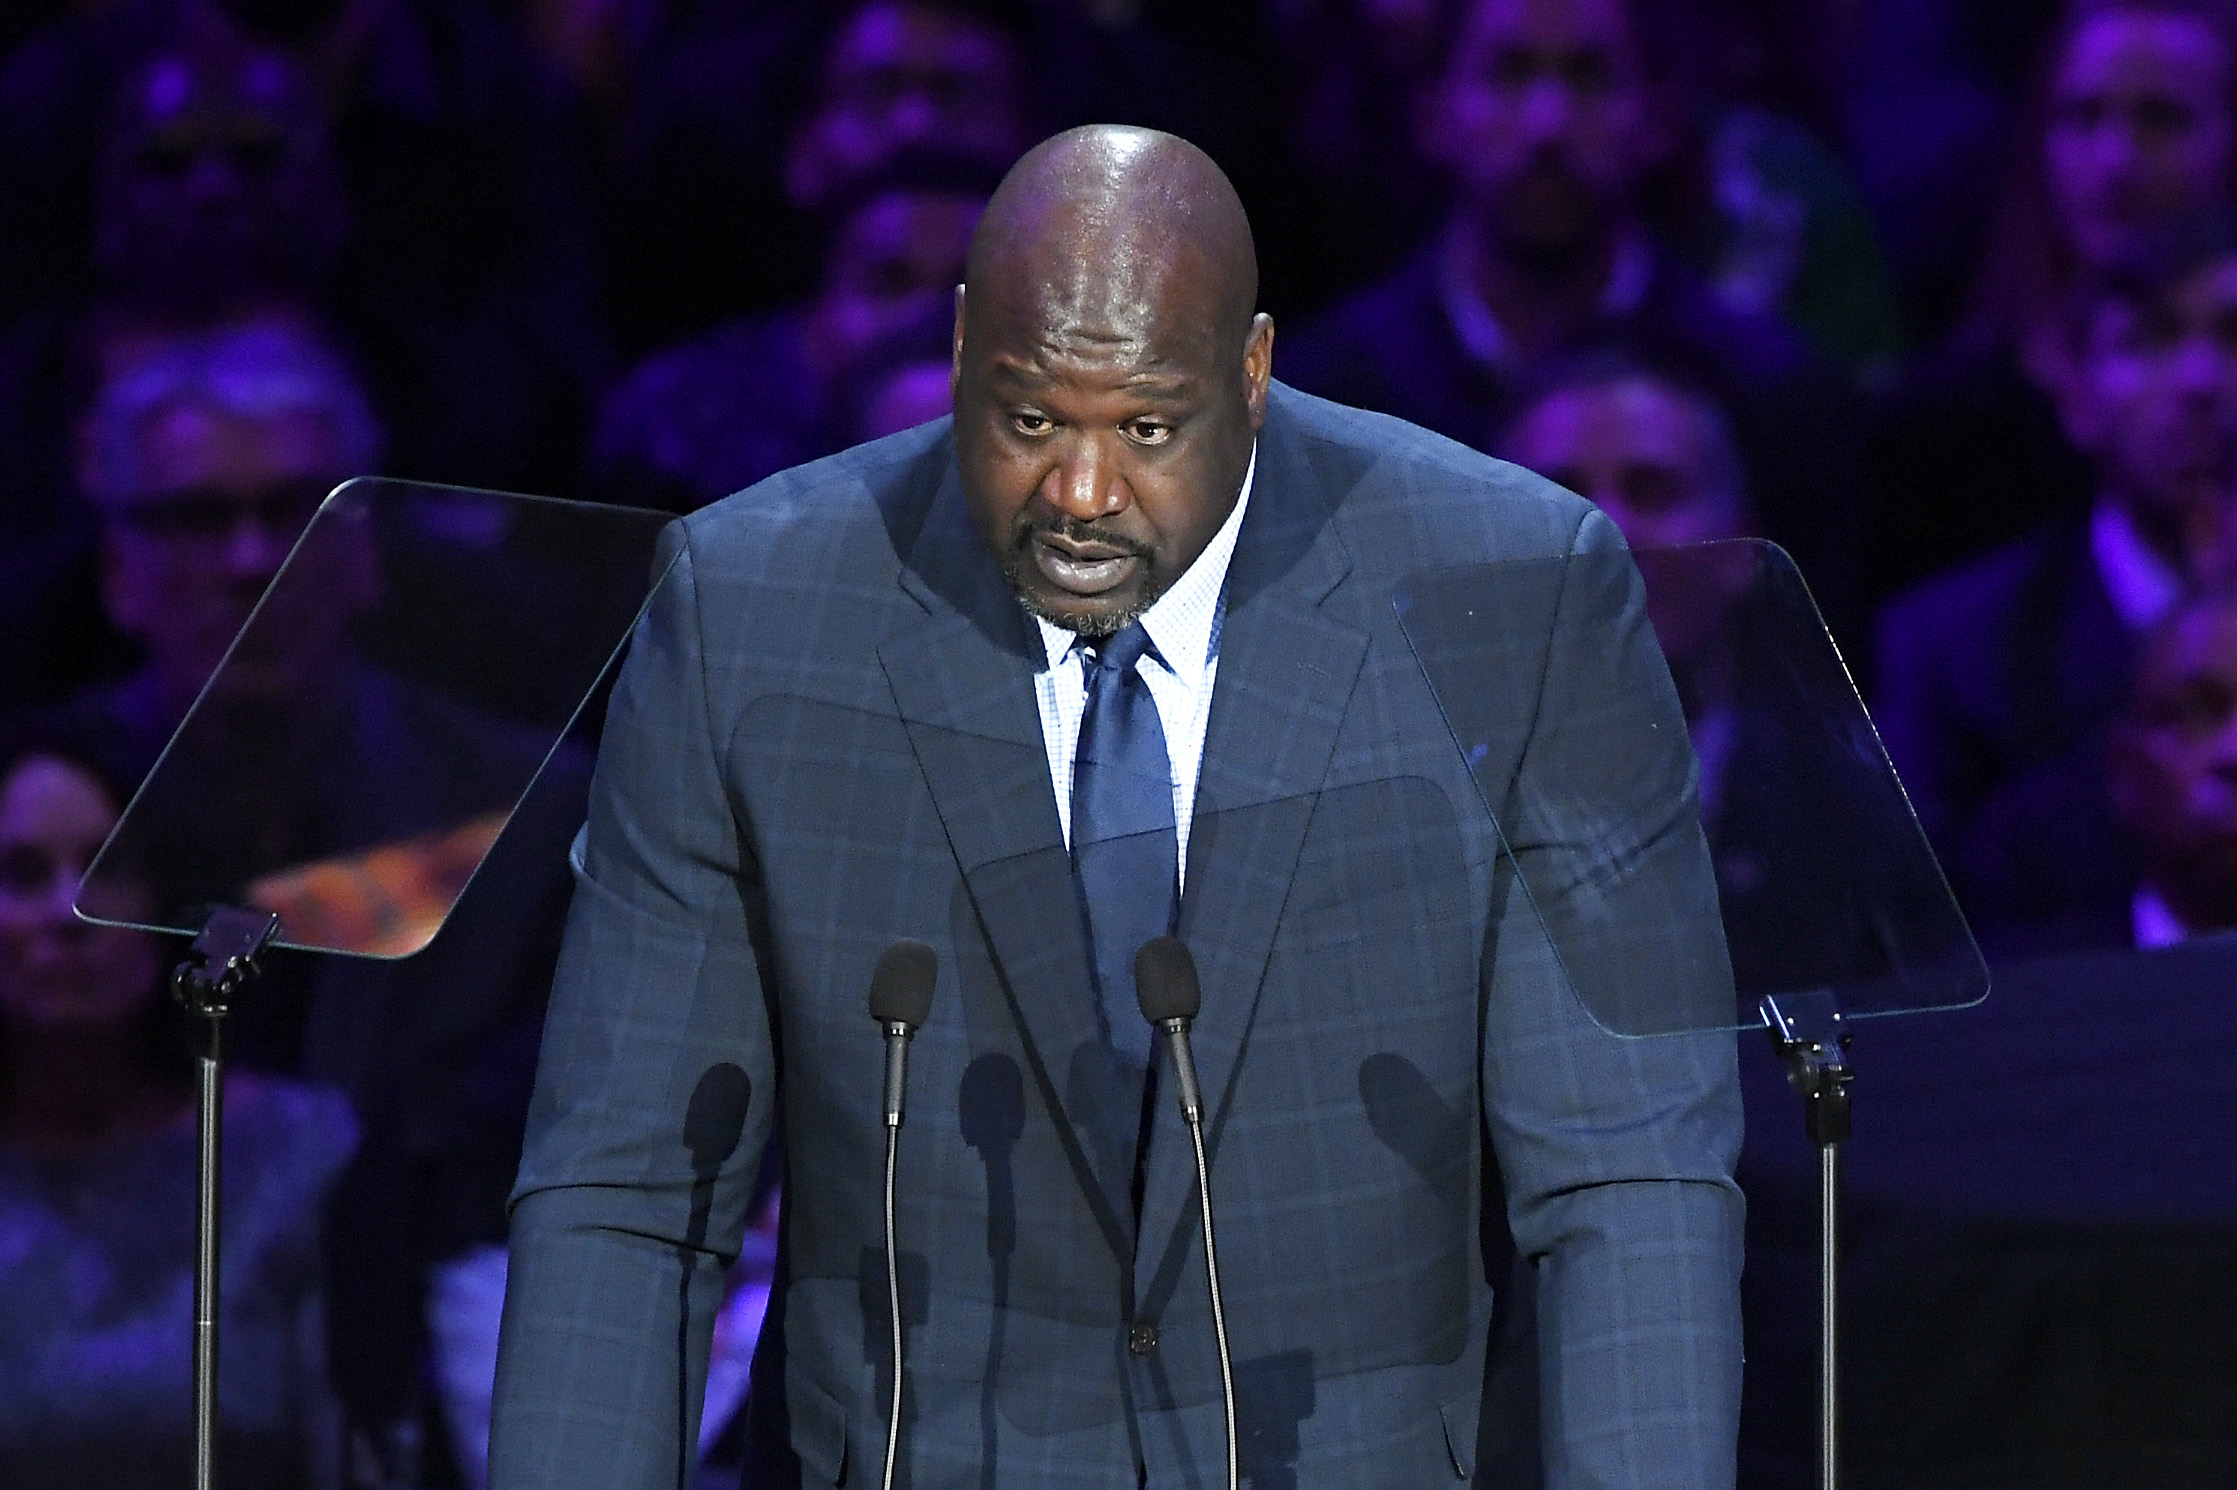 Shaquille O’Neal Tragically Lost His Sister to Cancer 3 Months Before Kobe’s Death